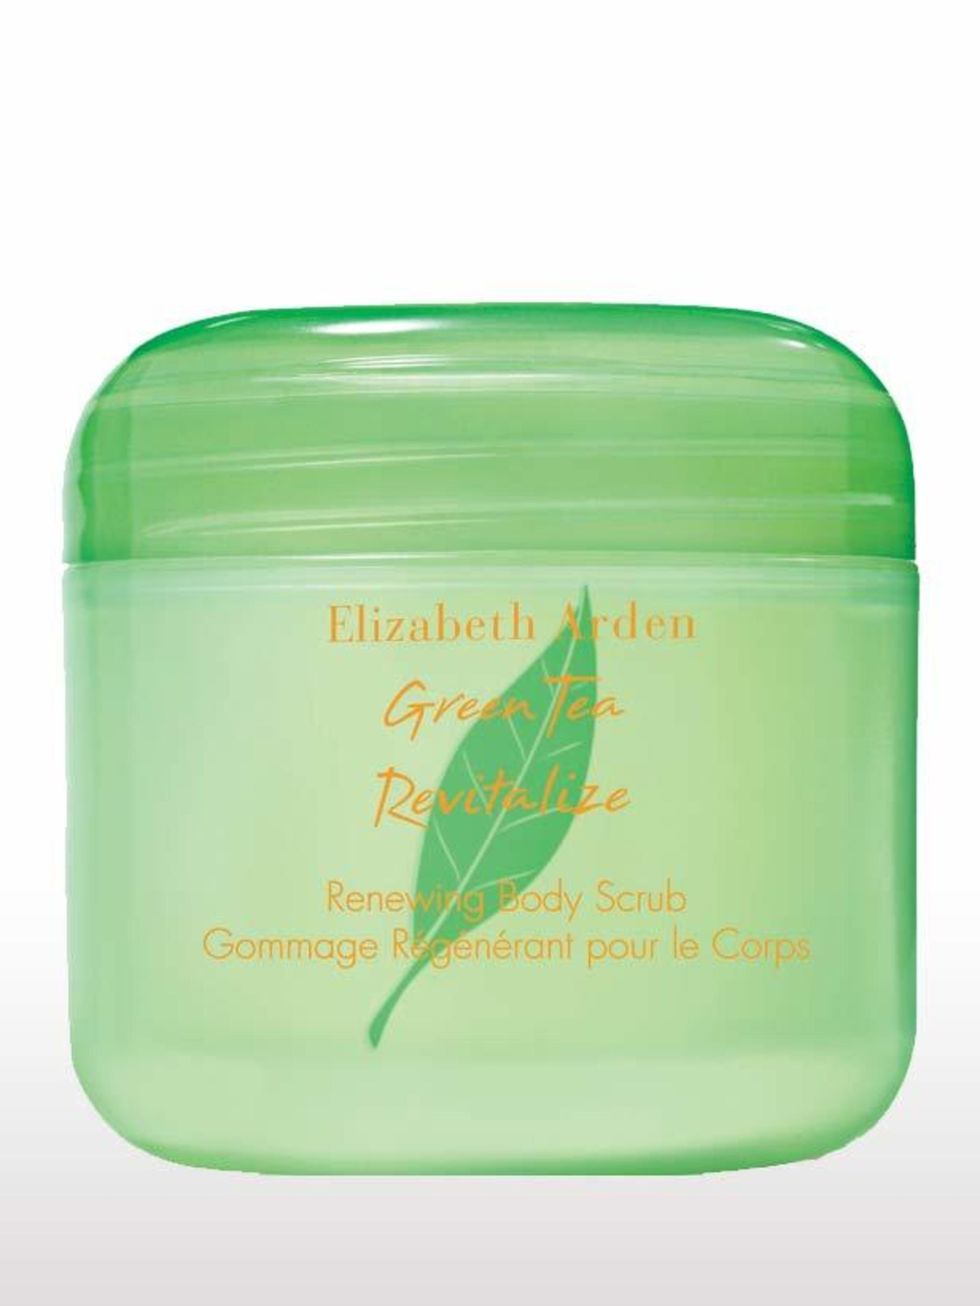 <p><strong>One week to go</strong></p><p>This scrub contains plenty of antioxidant-rich ingredients  green &amp; white tea, ginko biloba and sophora japonica to mop up free radicals that will exacerbate the signs of ageing through sun damage. Start exfol